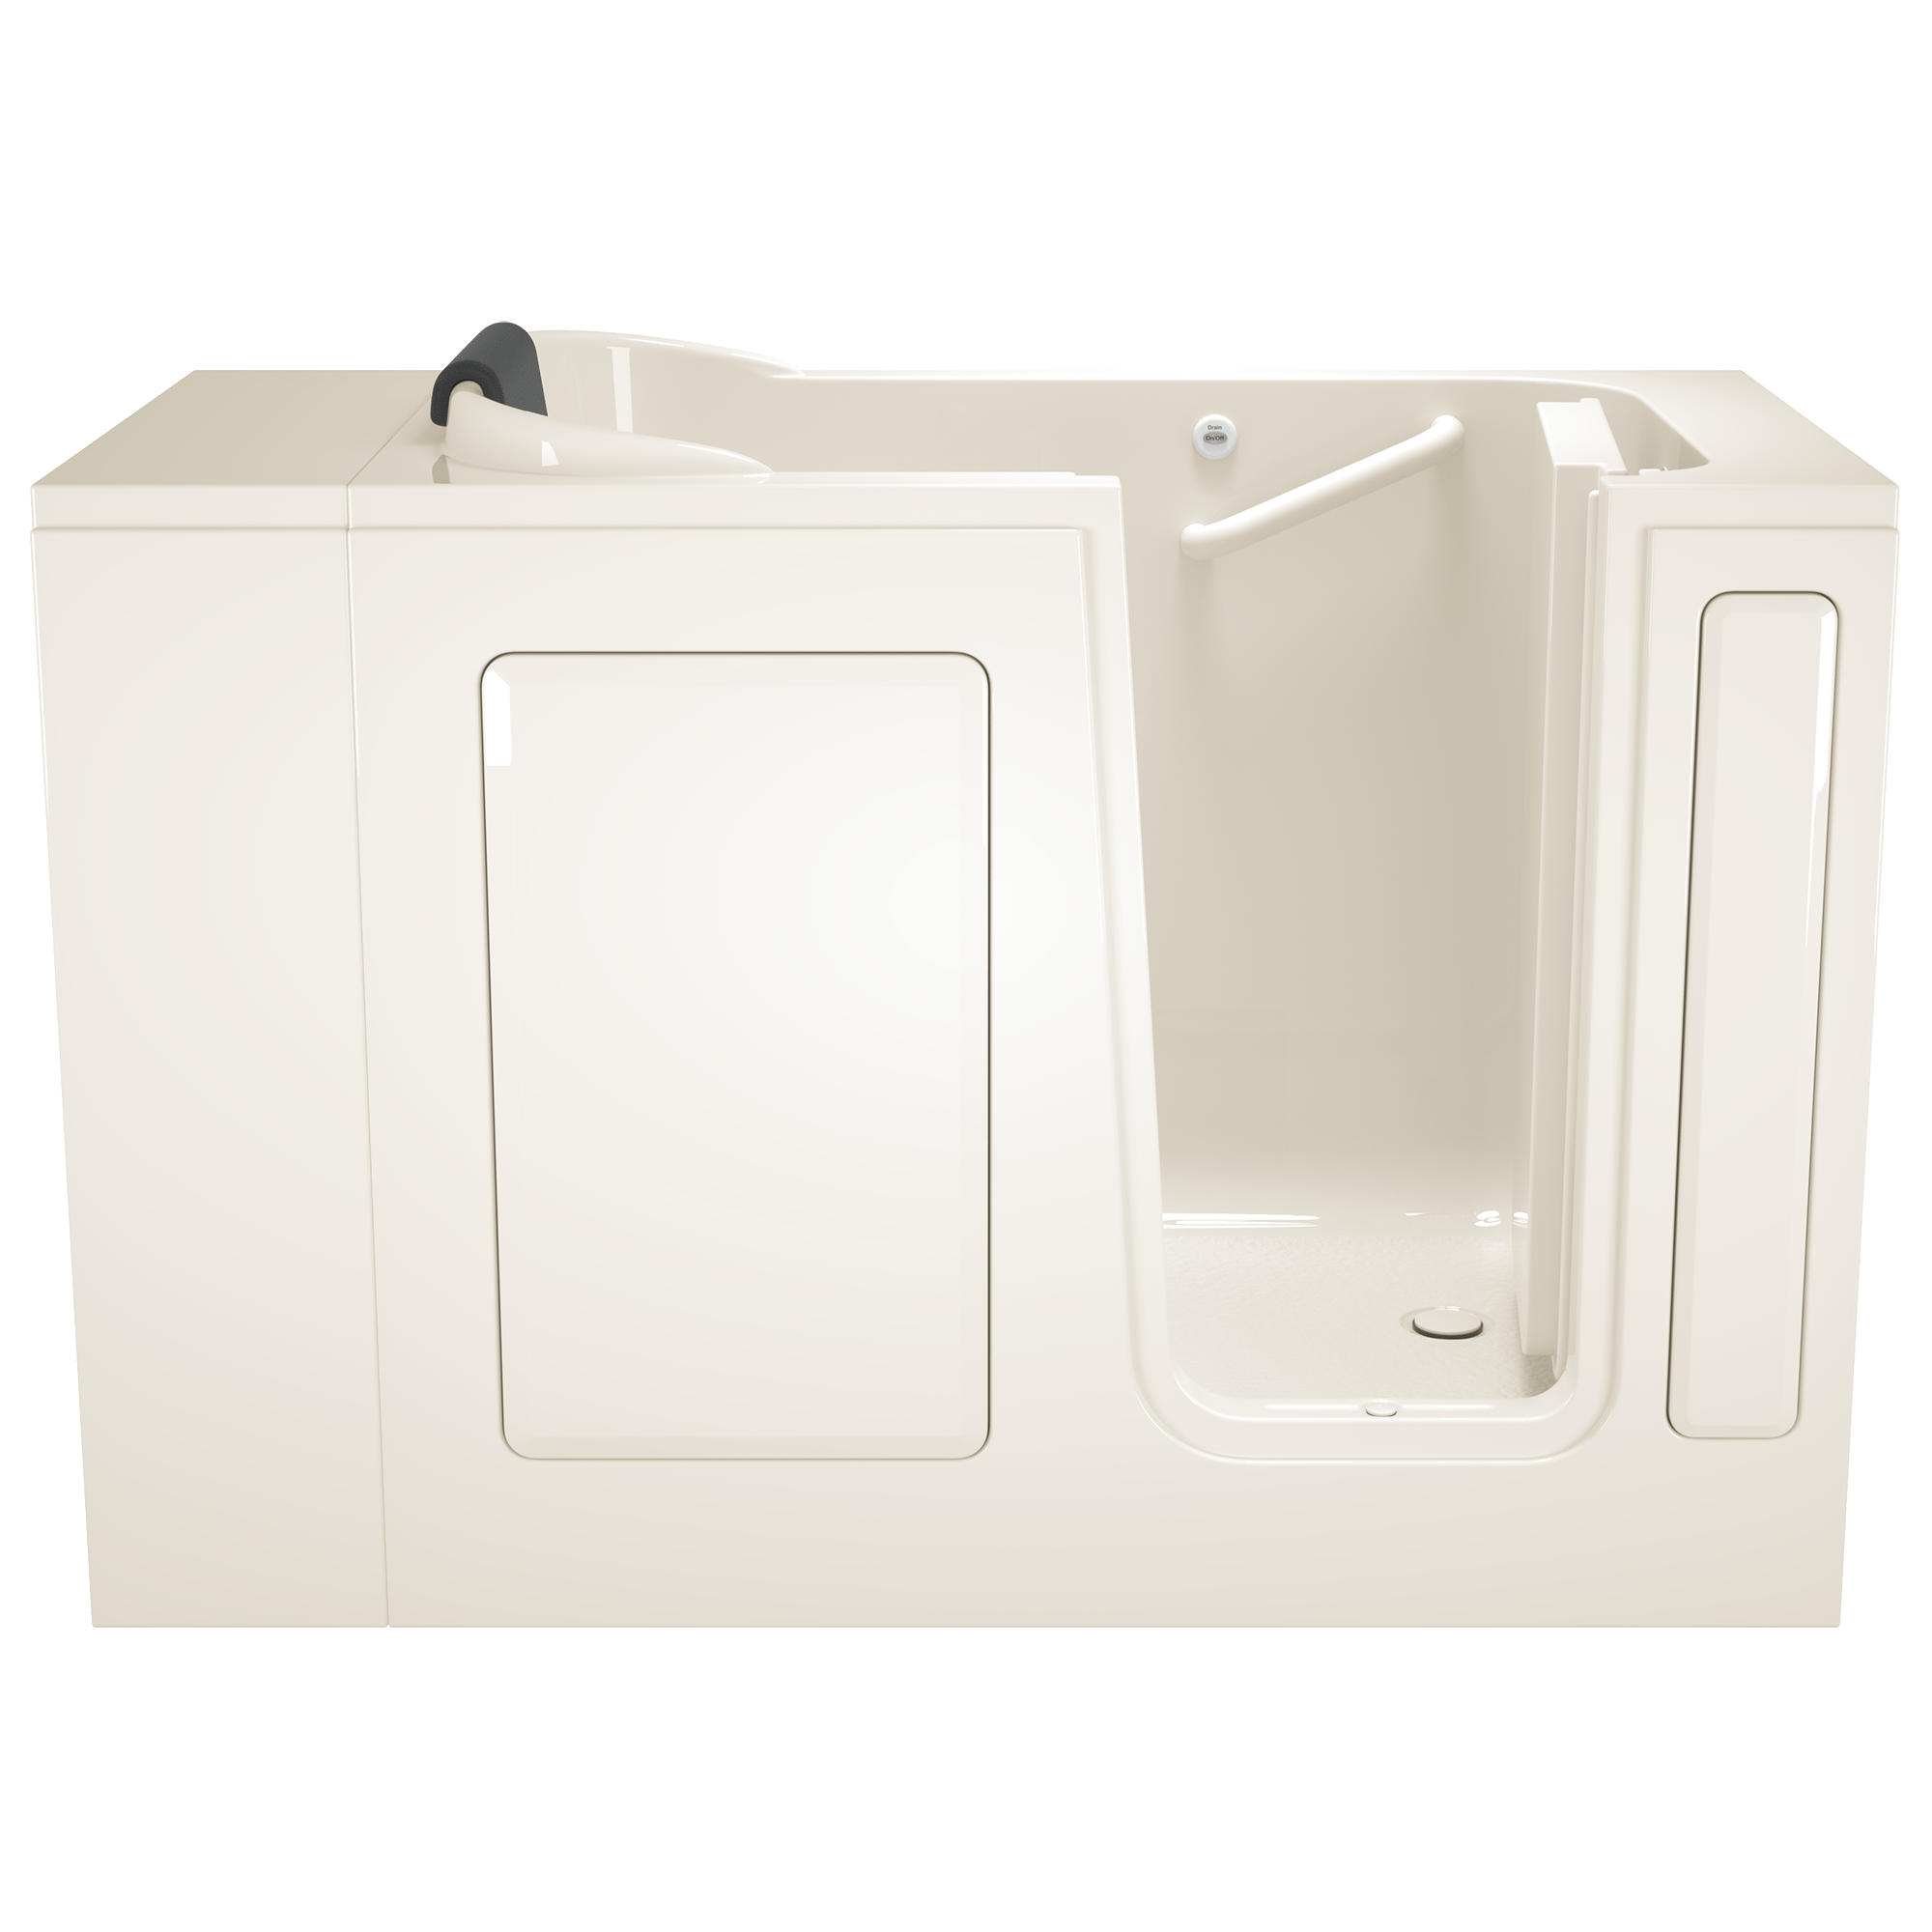 Gelcoat Premium Series 28 x 48 Inch Walk in Tub With Soaker System   Right Hand Drain WIB LINEN